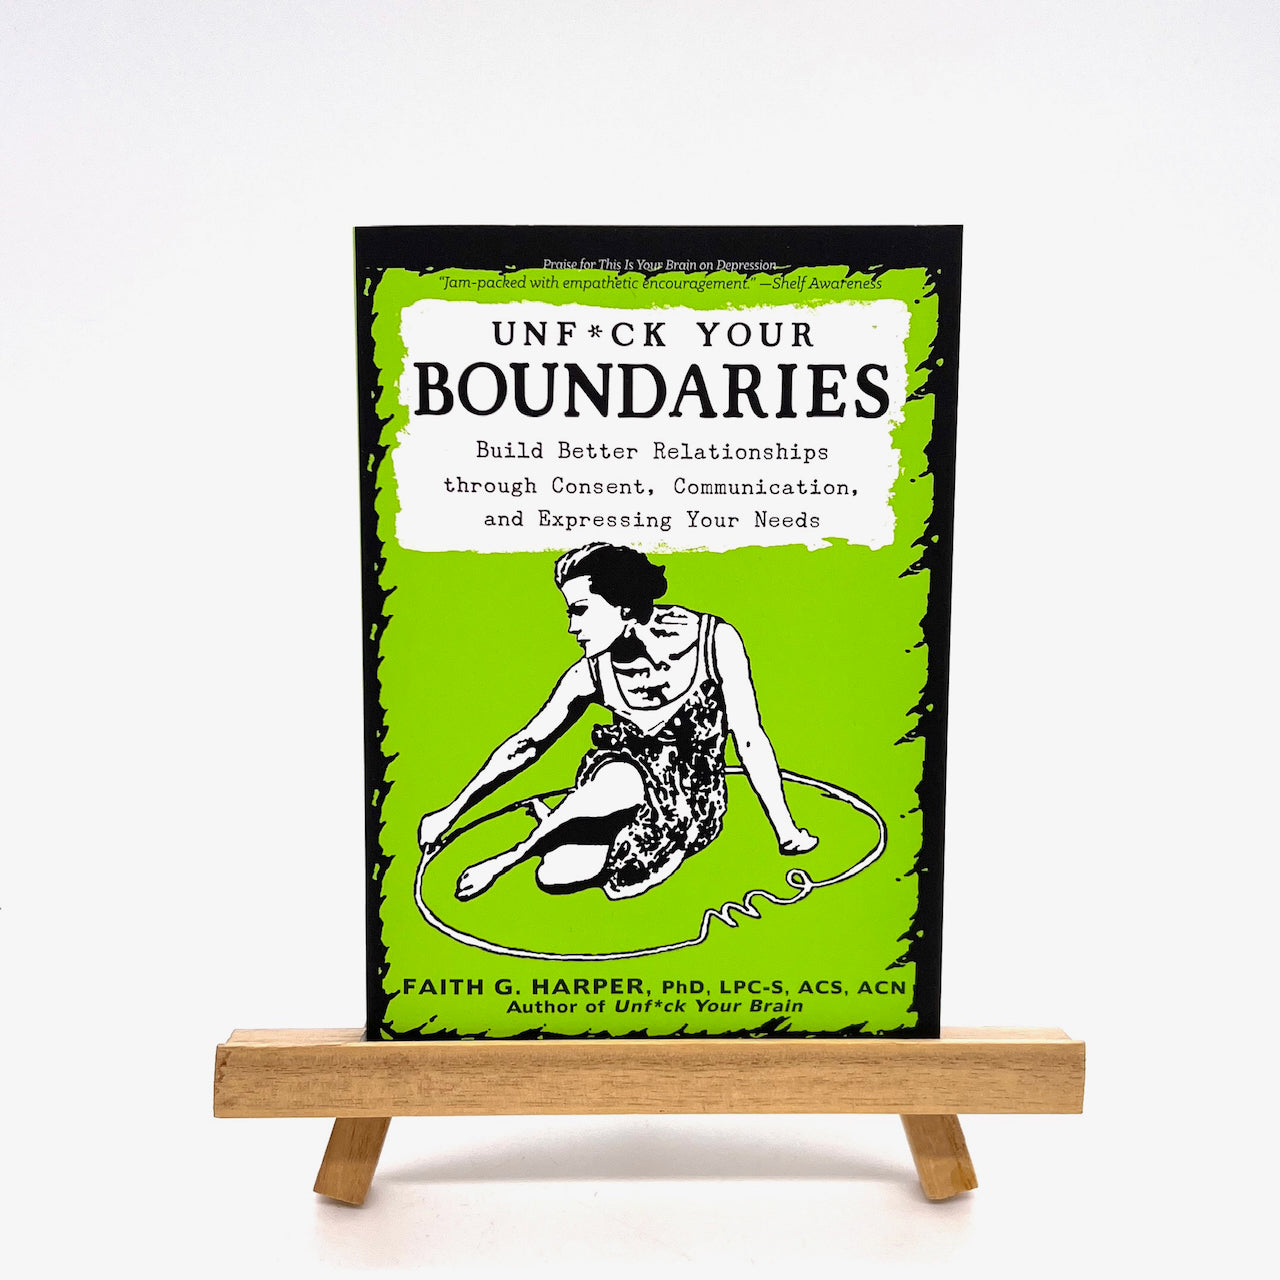 Book cover of Unfuck Your Boundaries, building better relationships through consent, communication, and expressing your needs.